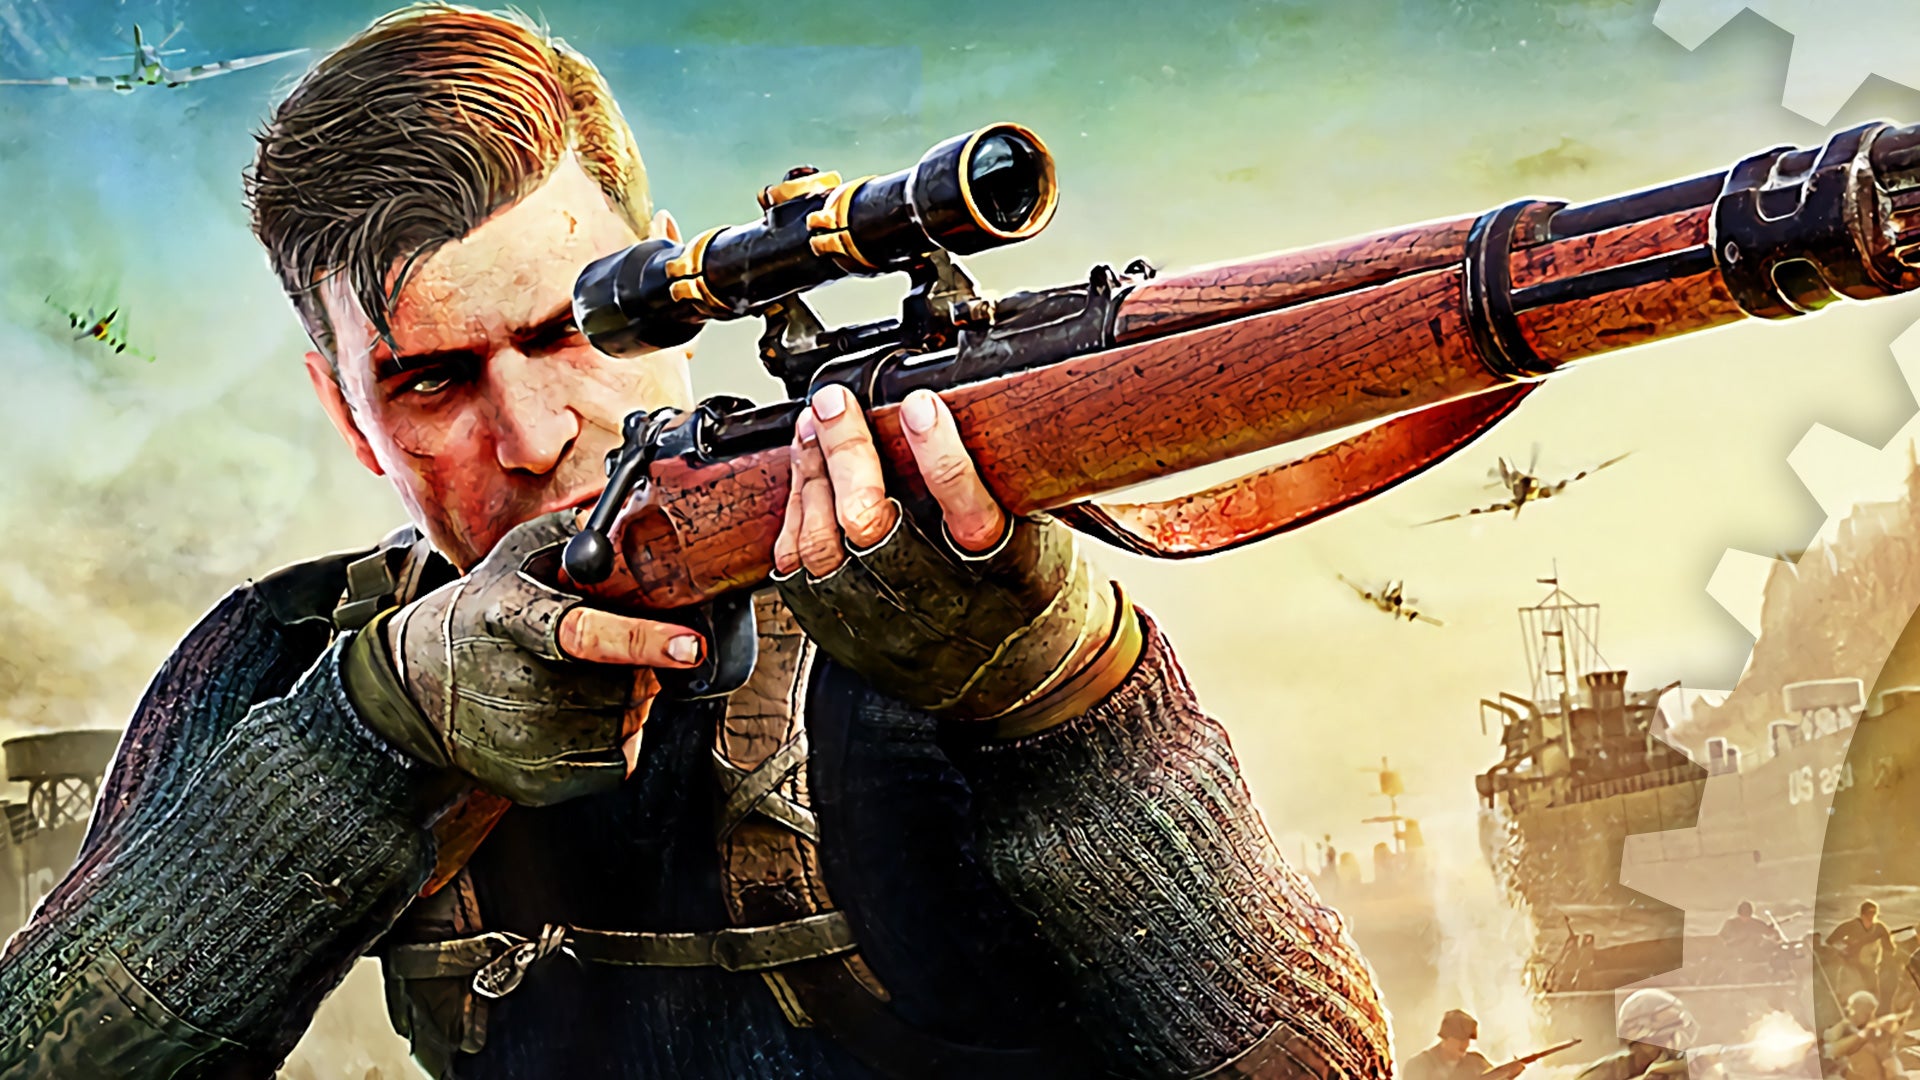 Image for Games of 2022: Sniper Elite 5 had the best art